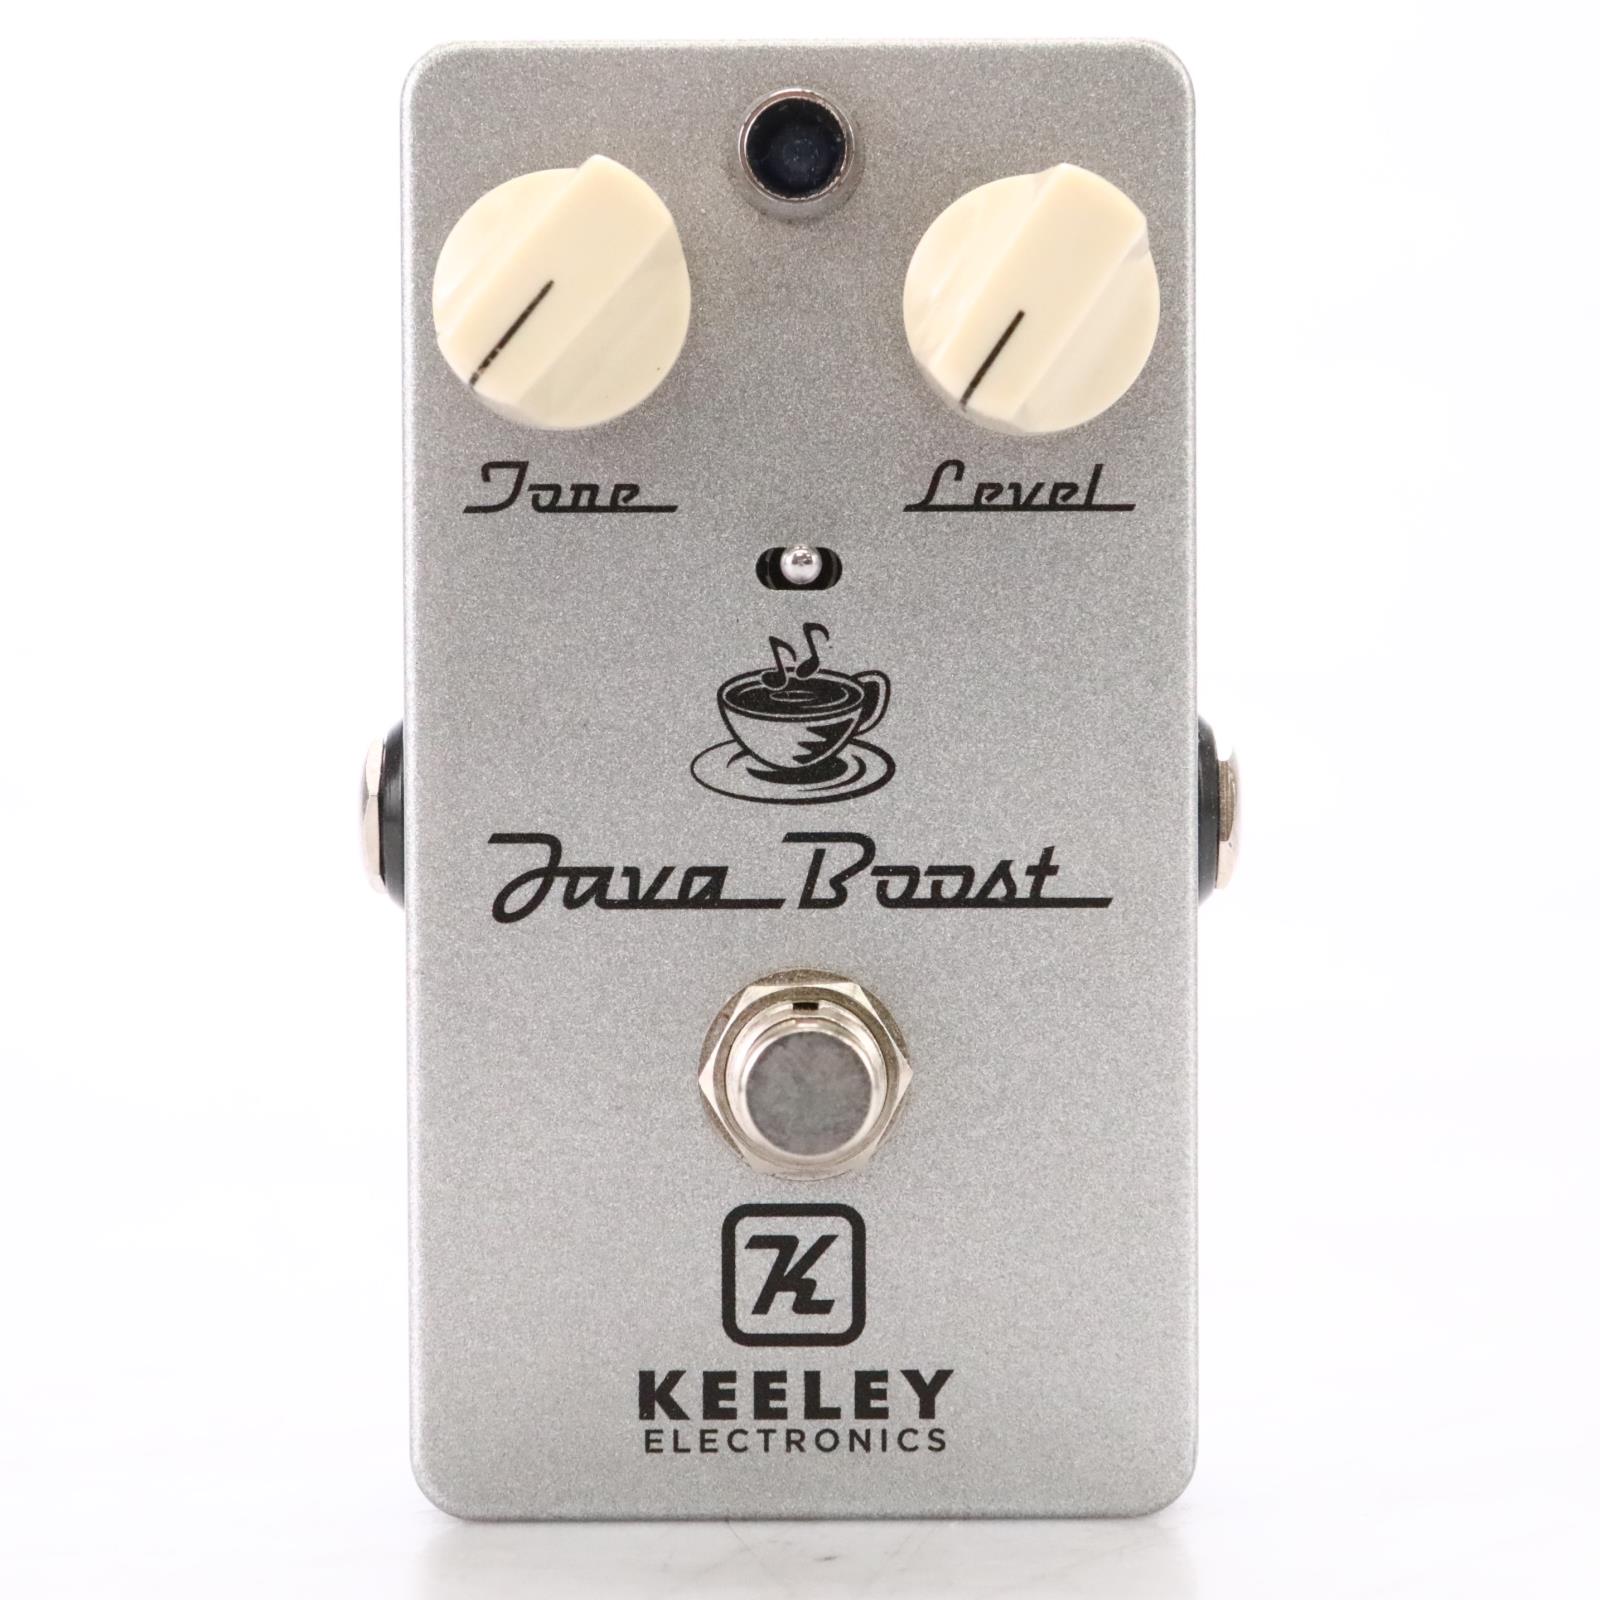 2018 Keeley Java Boost Guitar Effect Pedal Stompbox #50336